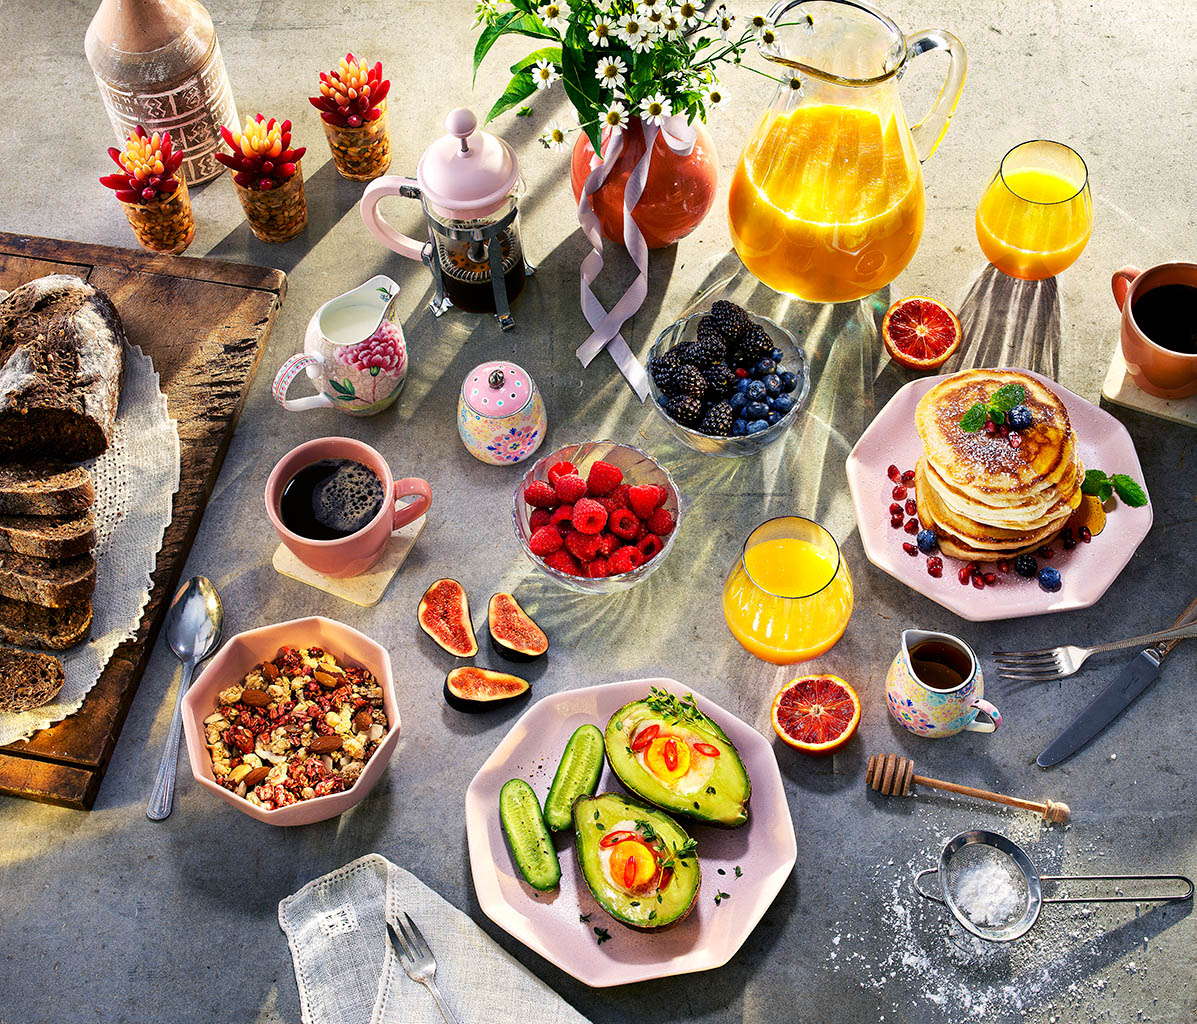 Food Photography of Breakfast feast by Packshot Factory